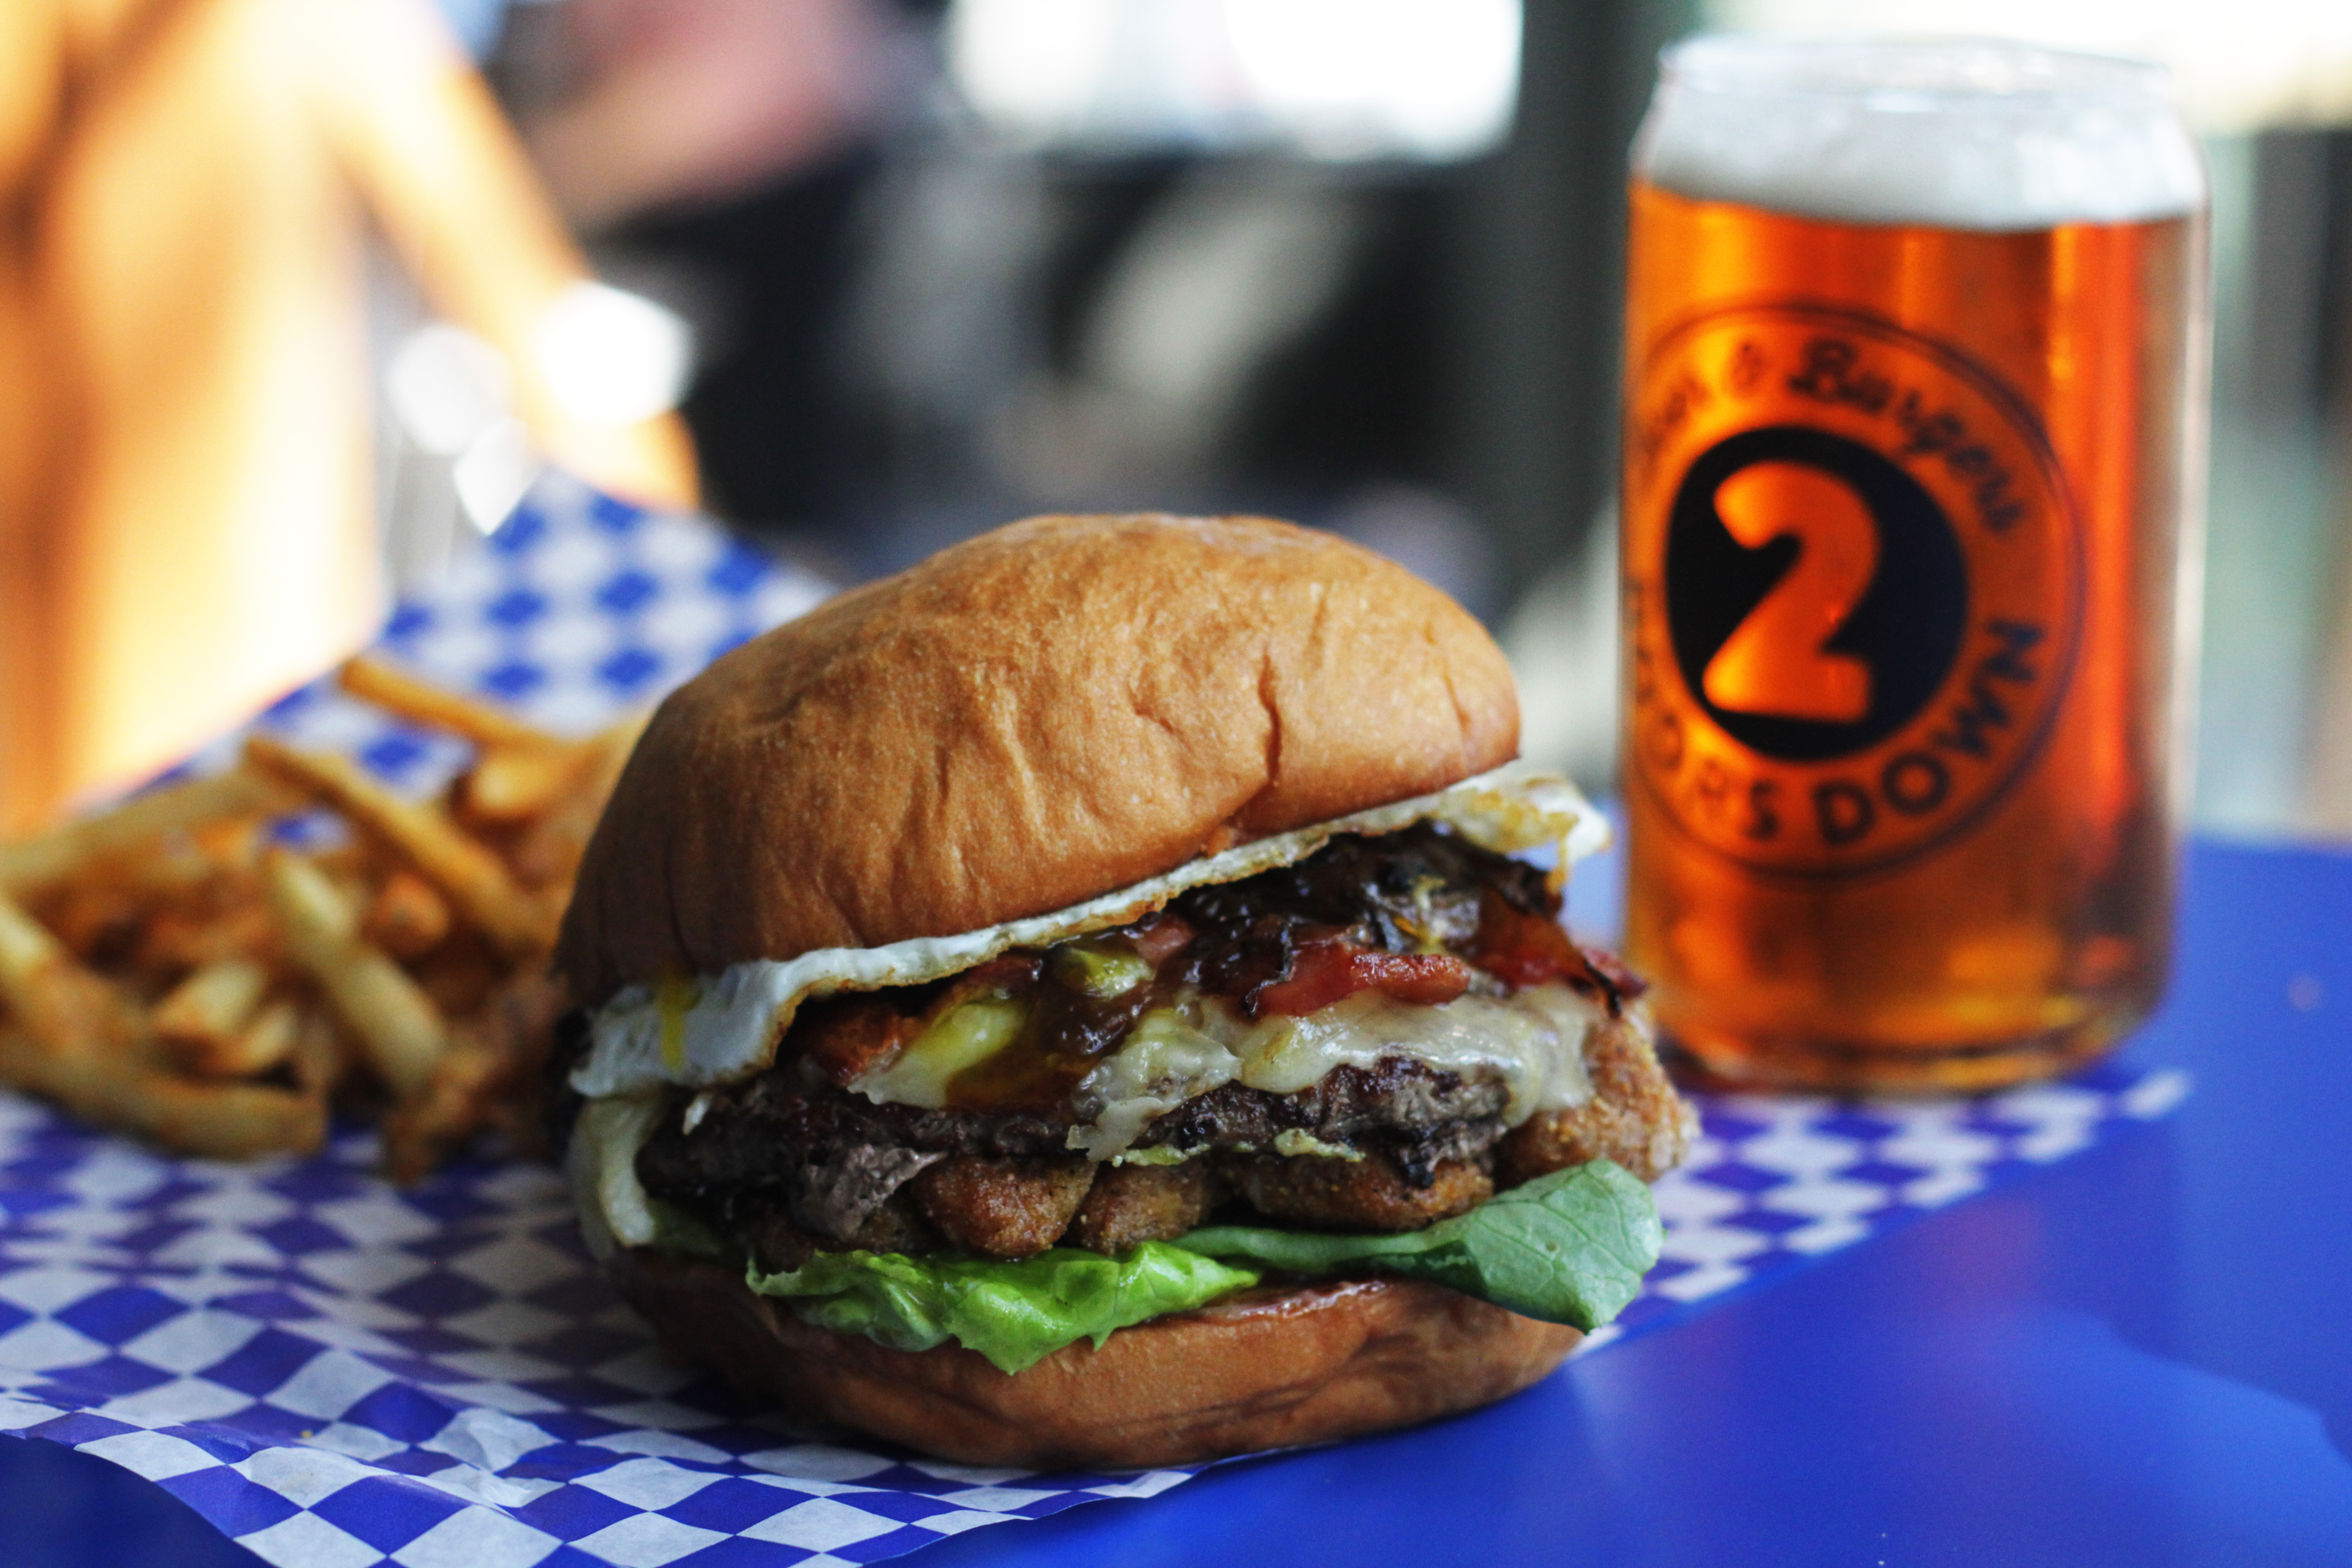 A burger loaded with toppings at Two Doors Down, next to a full glass of beer and fries in the background